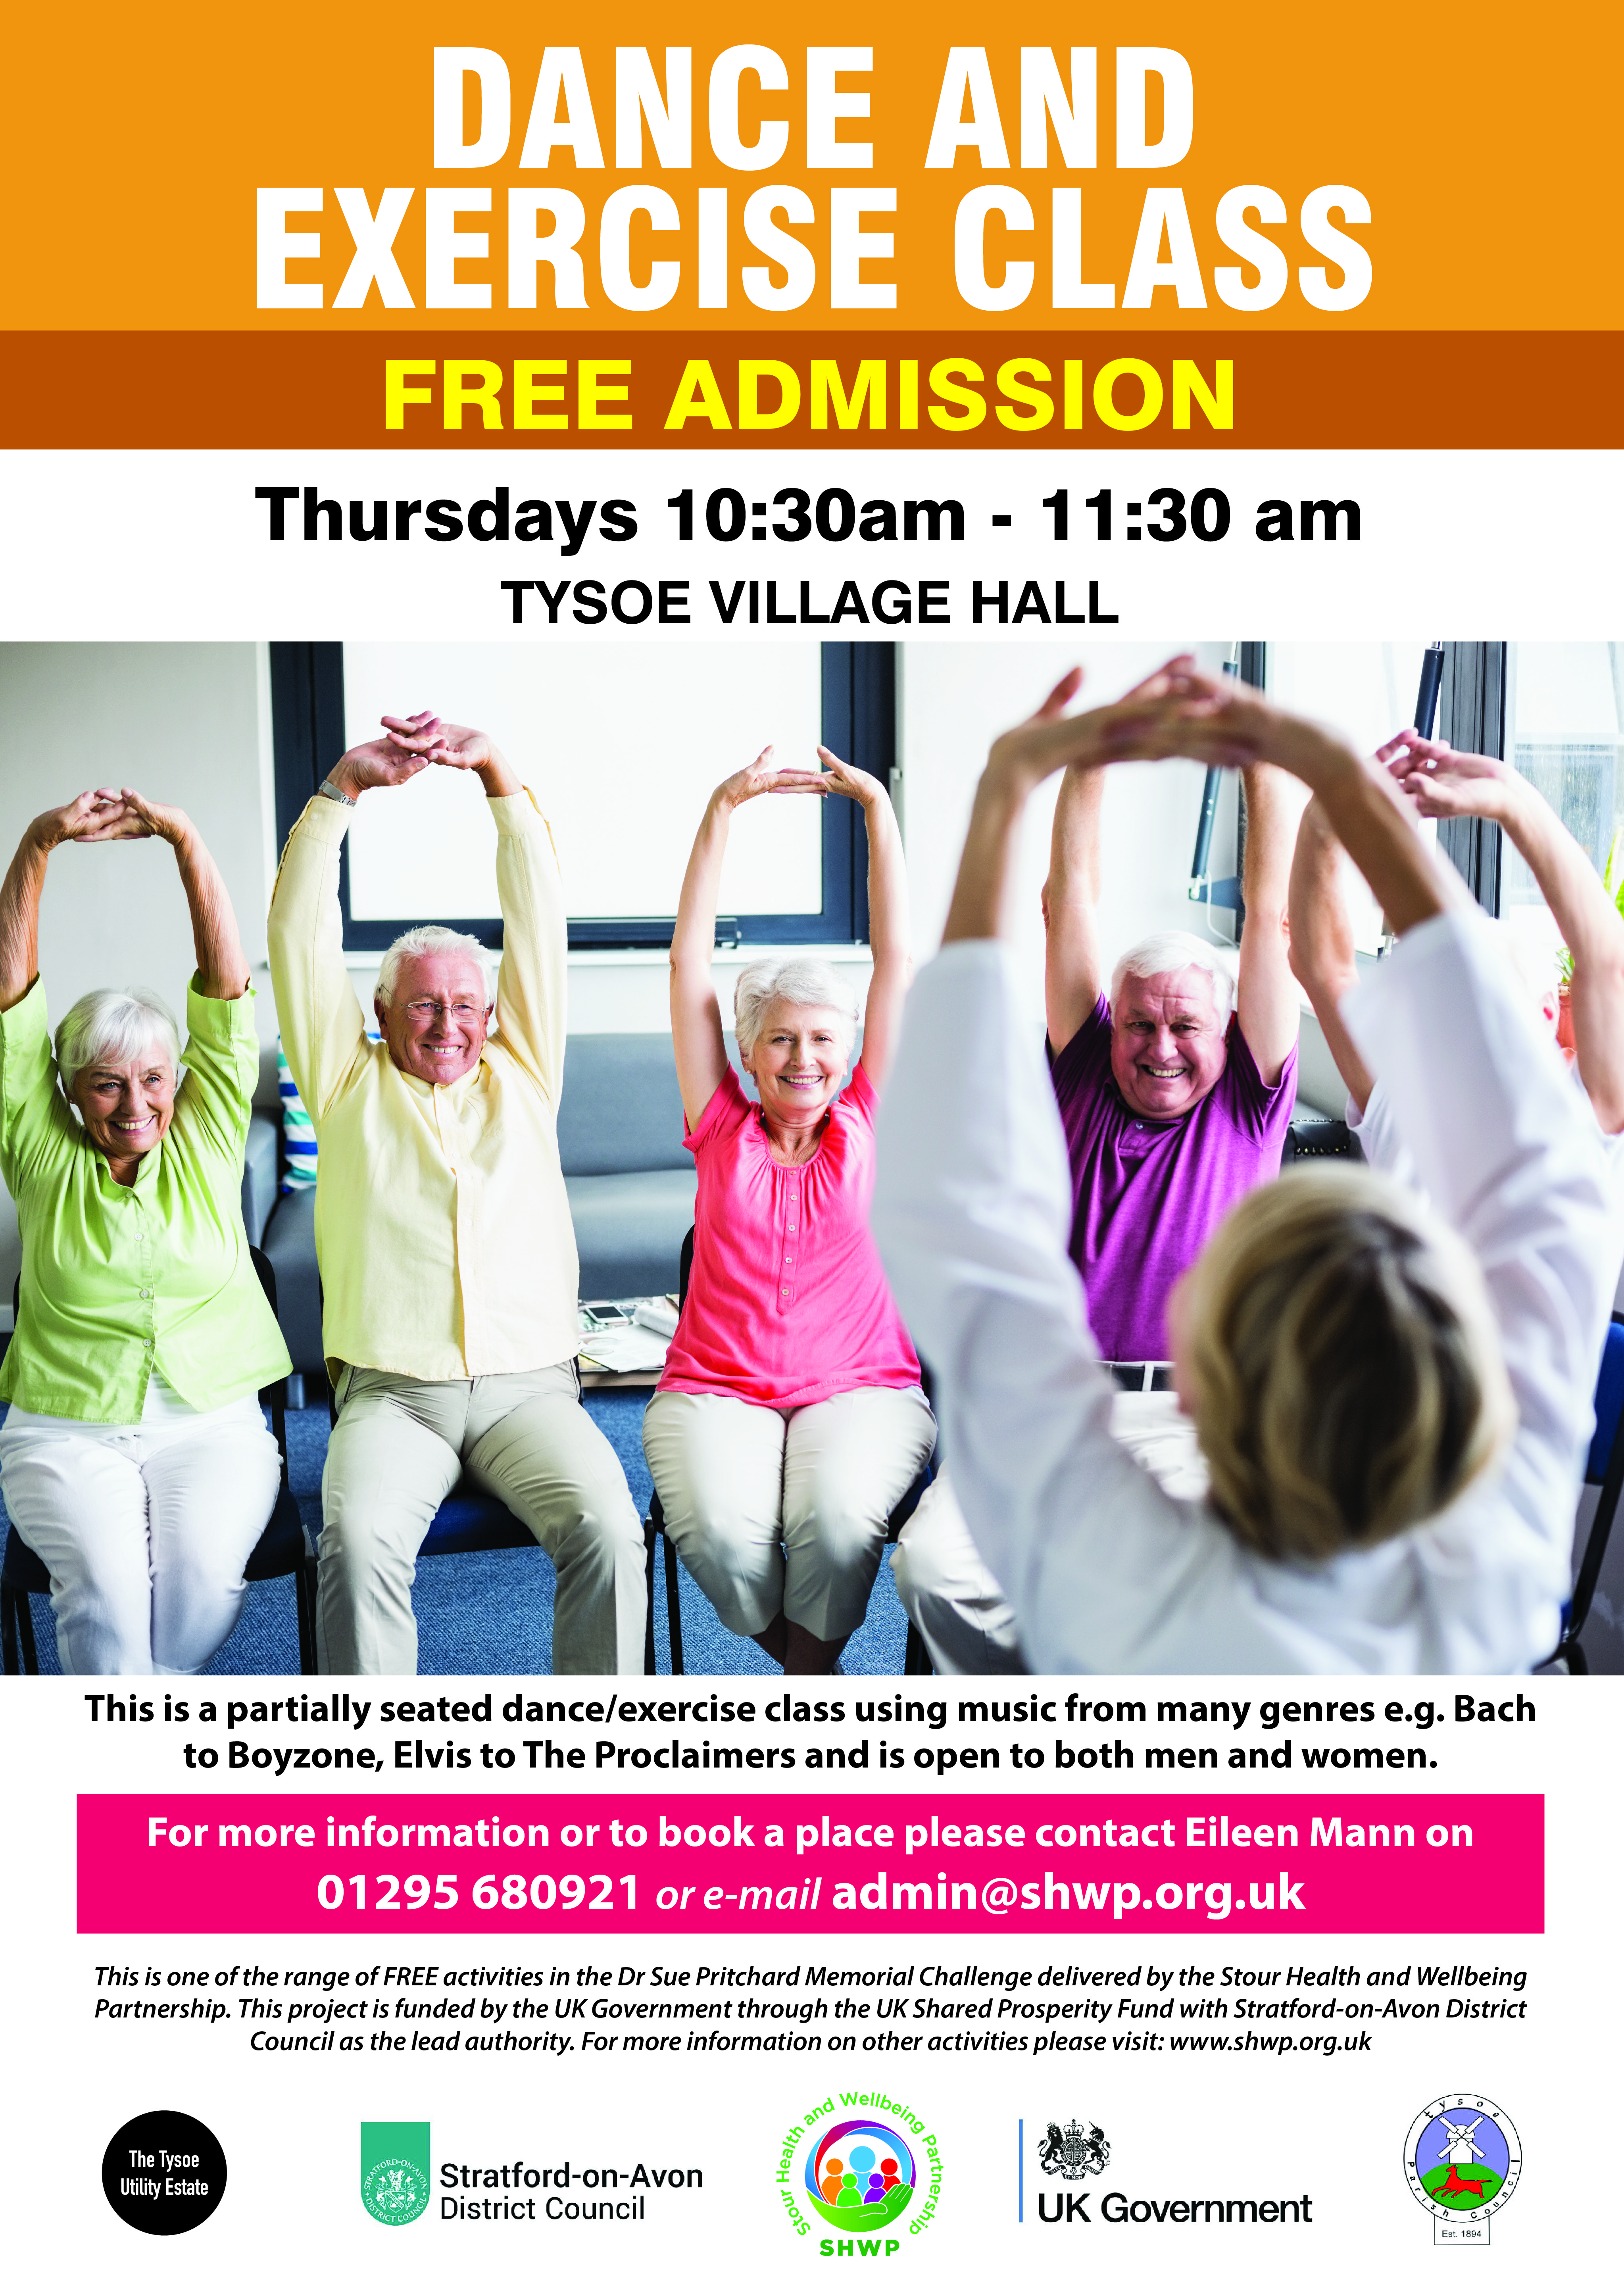 FREE Dance and Exercise Class at Tysoe Village Hall on Thursdays 10:30 - 11:30